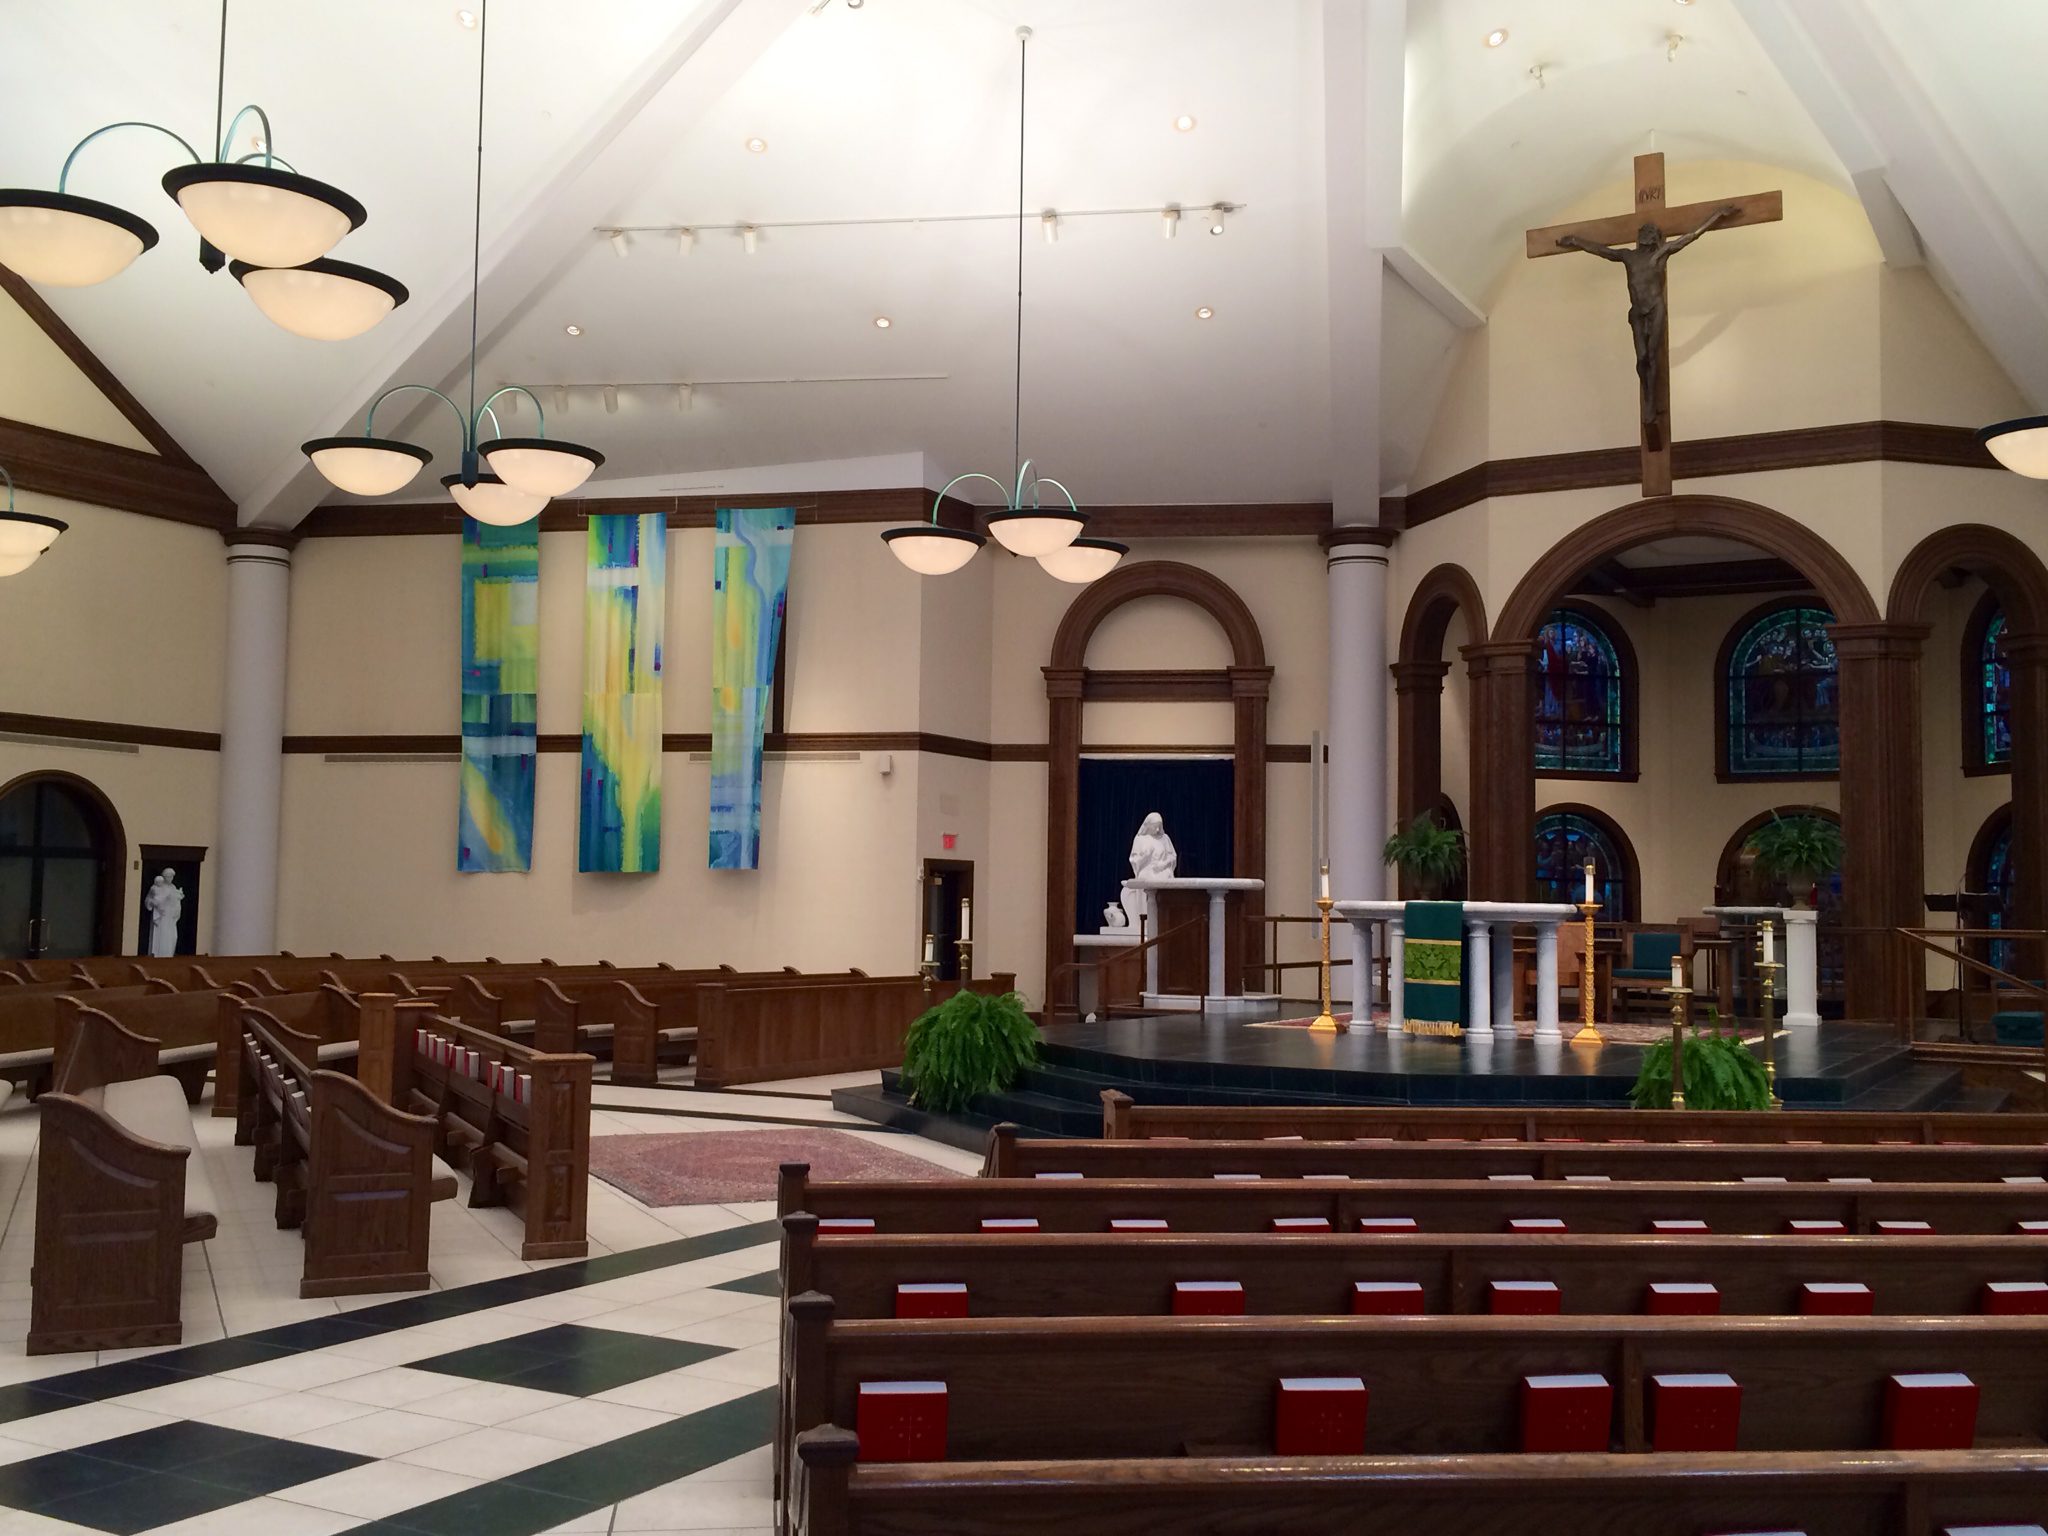 Ordinary Time, Our Lady of Mercy Church